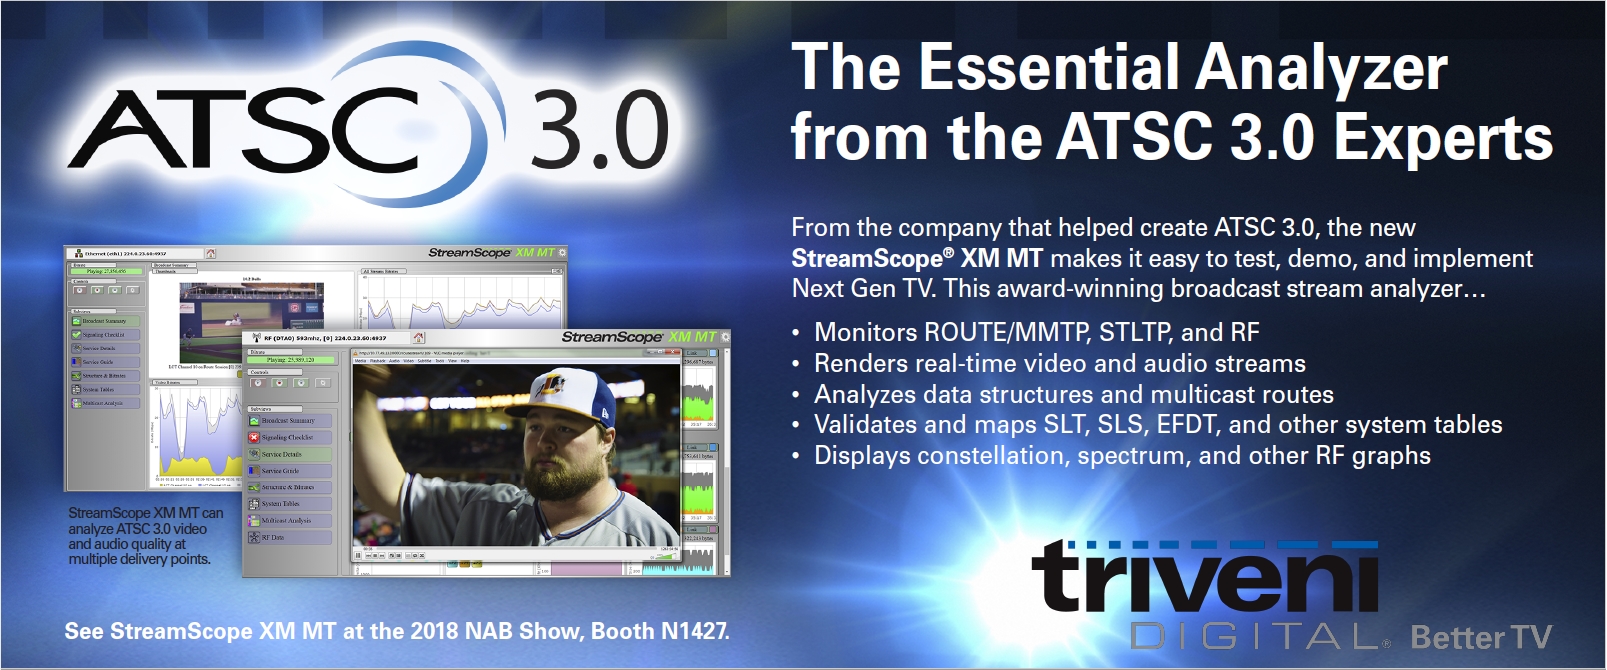 The Essential Analyzer From the ATSC 3.0 Experts